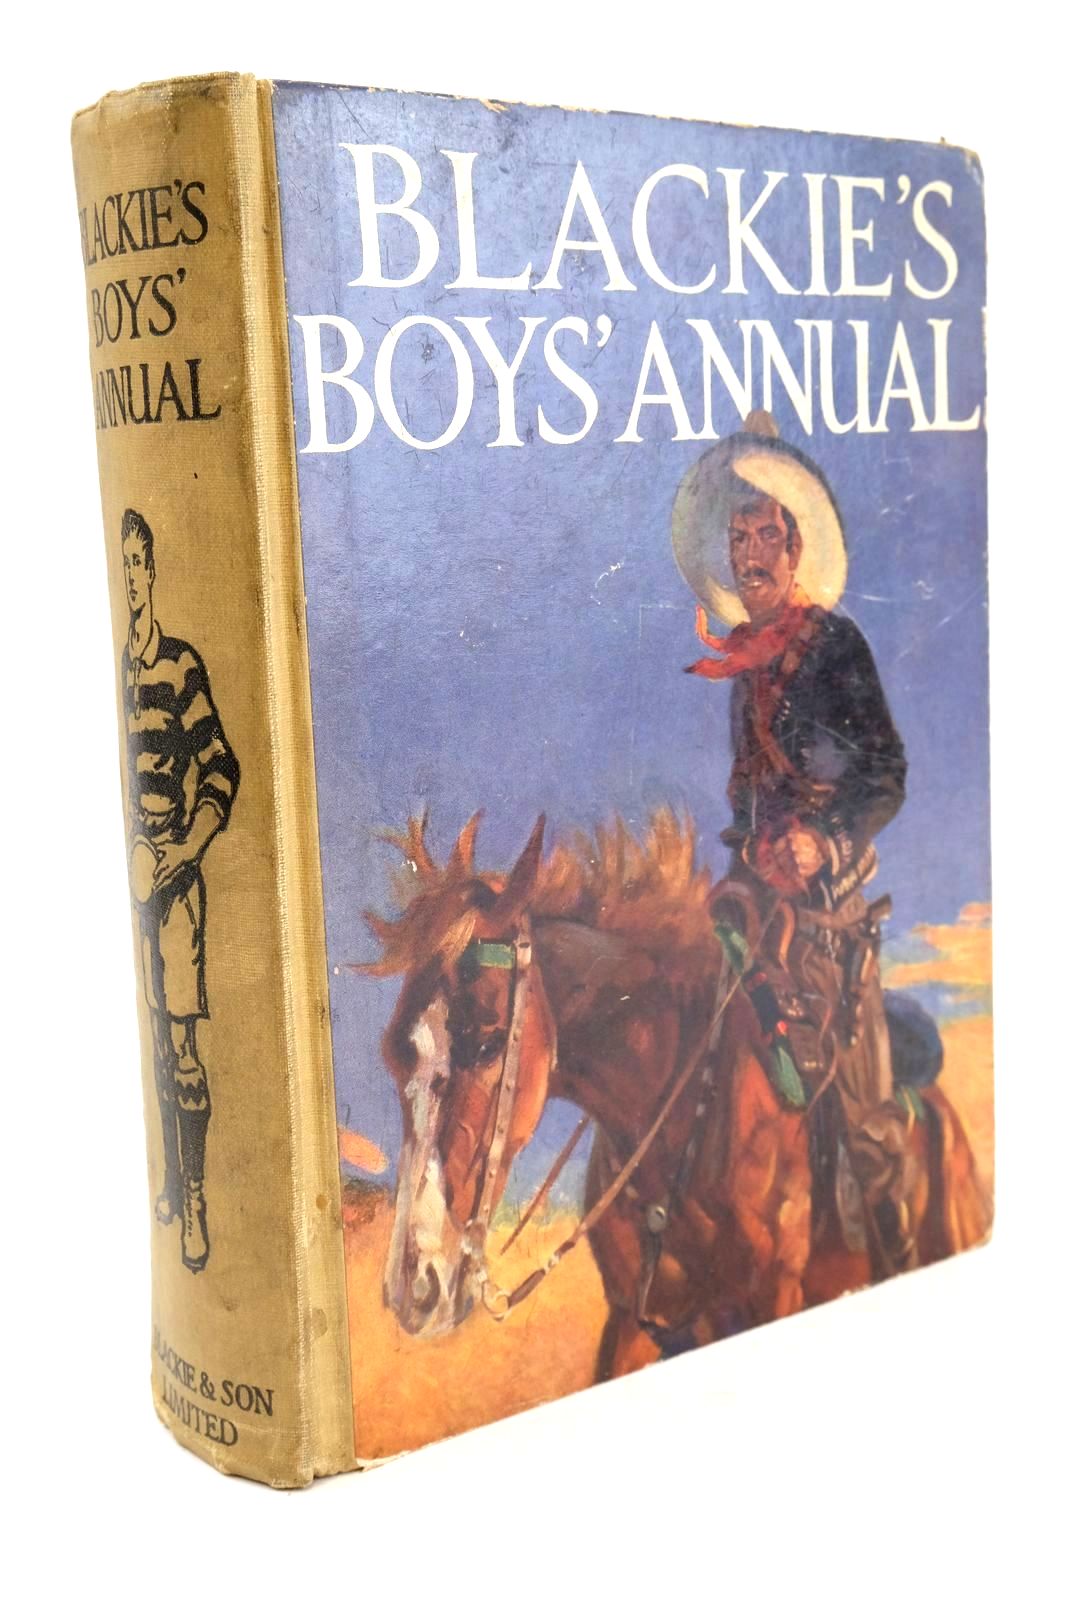 Photo of BLACKIE'S BOYS' ANNUAL written by Baker, Olaf Westerman, Percy F. Rutley, C. Bernard et al, illustrated by Millar, H.R. Sindall, Alfred Browne, Gordon et al., published by Blackie &amp; Son Ltd. (STOCK CODE: 1325090)  for sale by Stella & Rose's Books